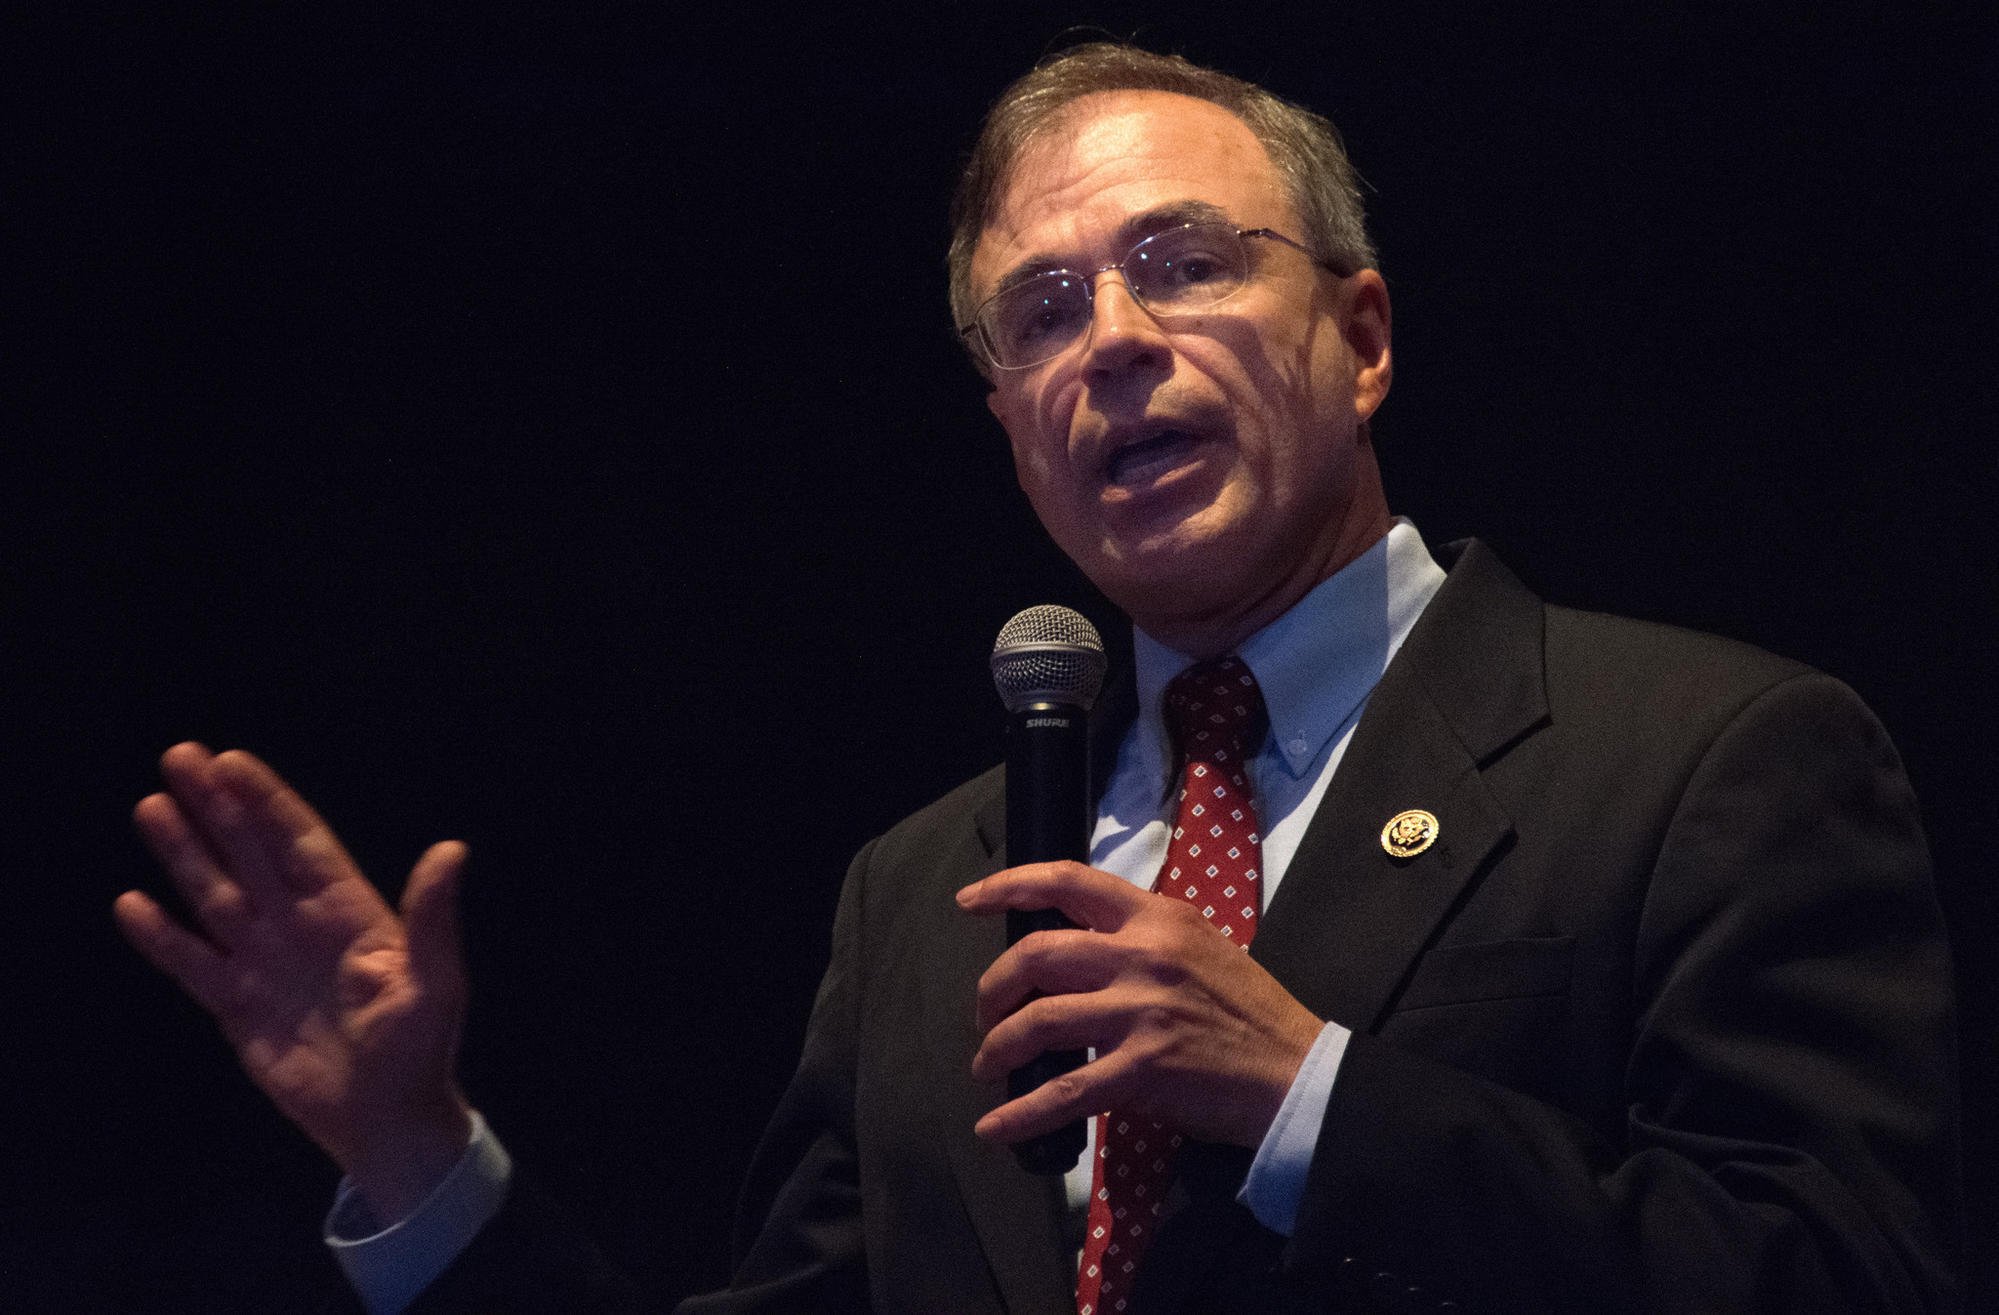 Maryland Rep. Andy Harris has become 'Public Enemy No. 1' for marijuana activists. How did it get so personal?